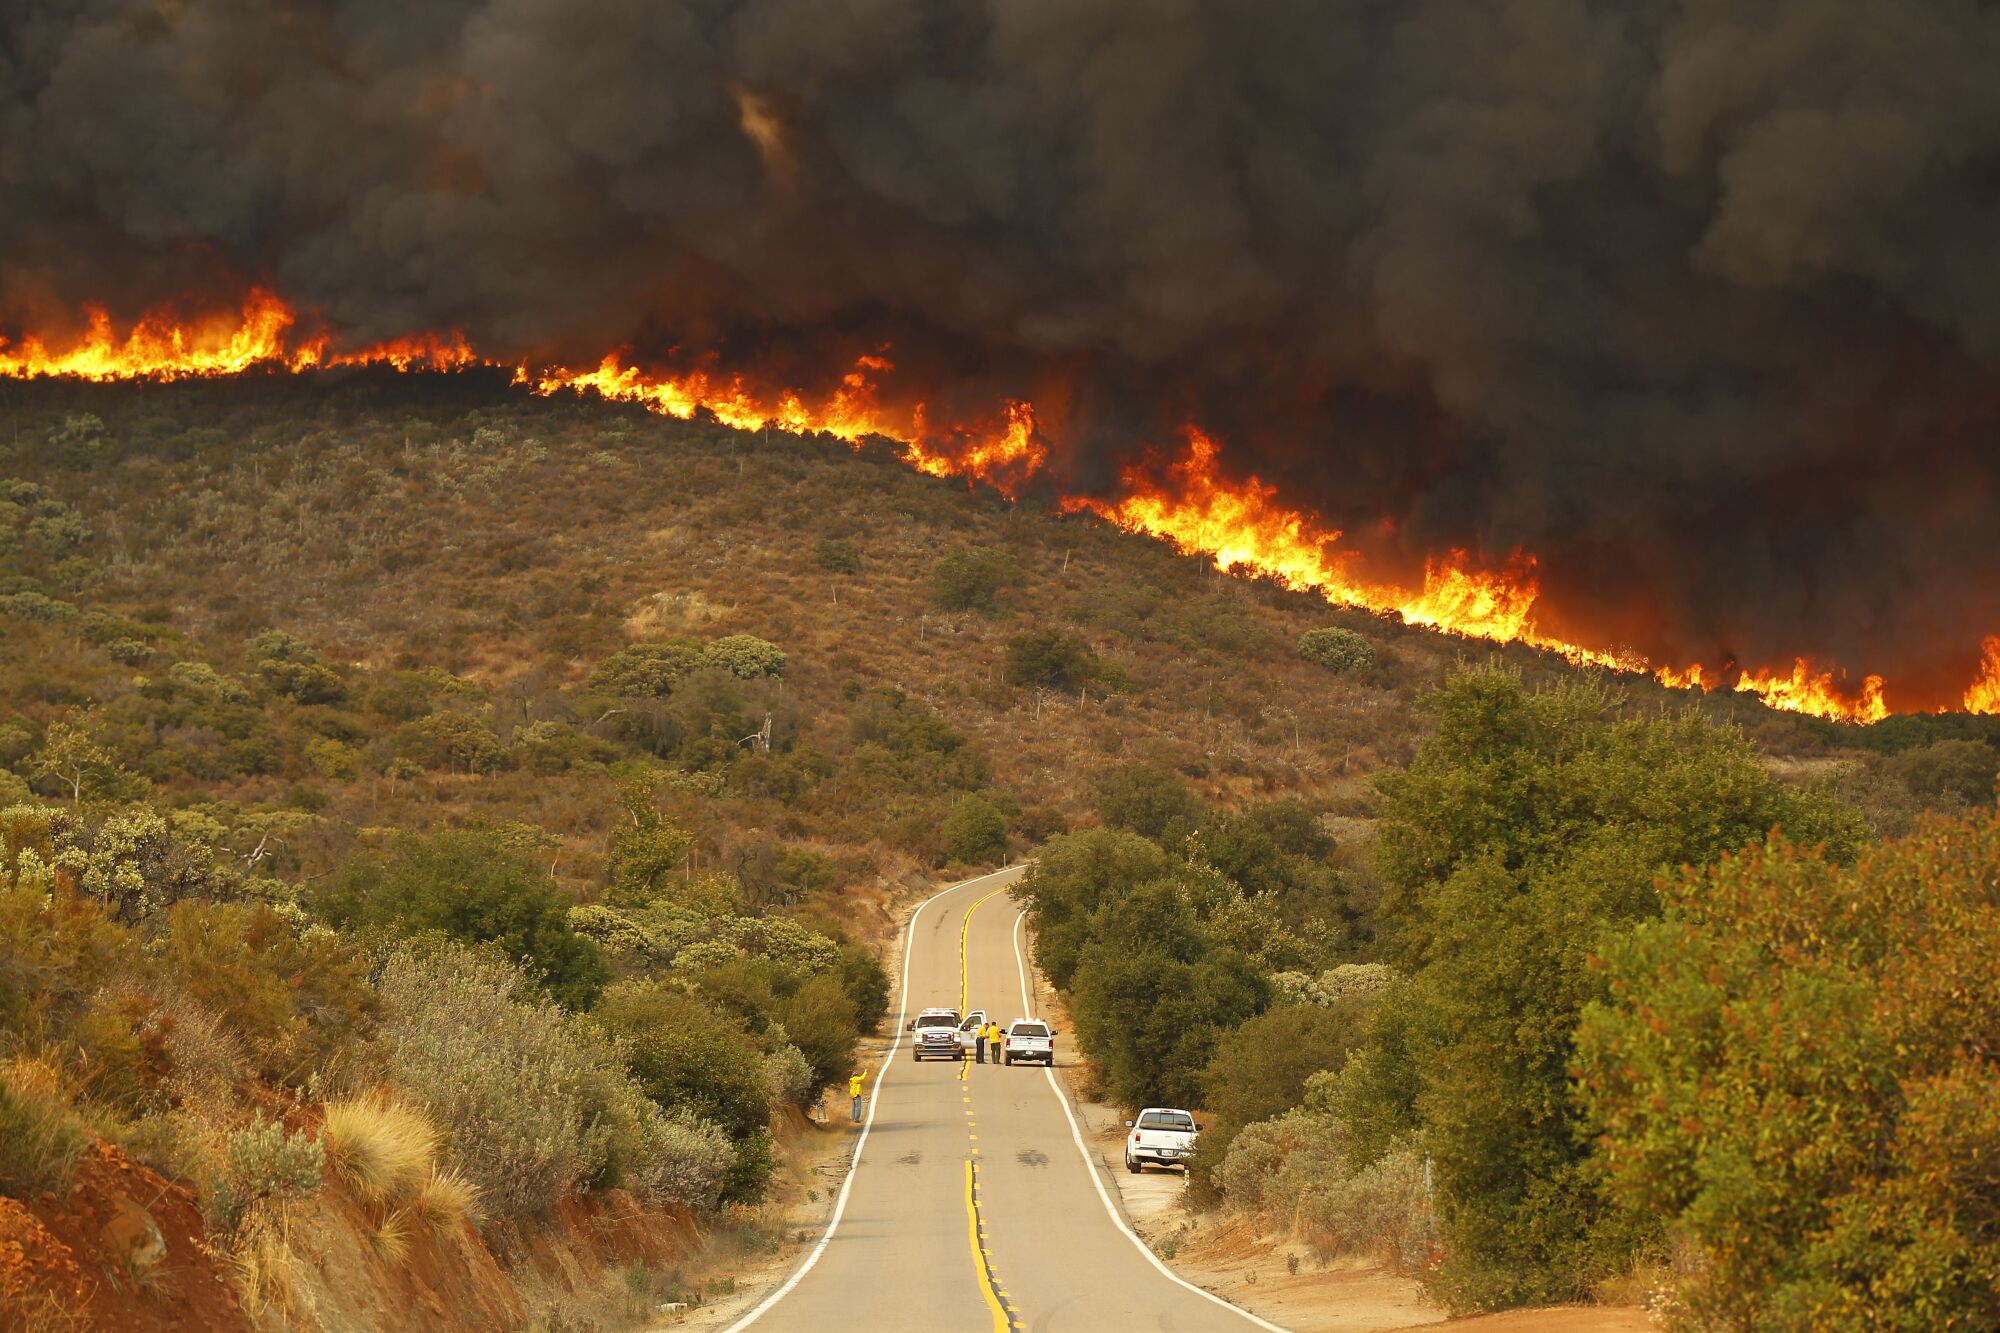 San Diego Sheriffs and CDF firefighters stage on Lyons Valley Road during the Valley fire.